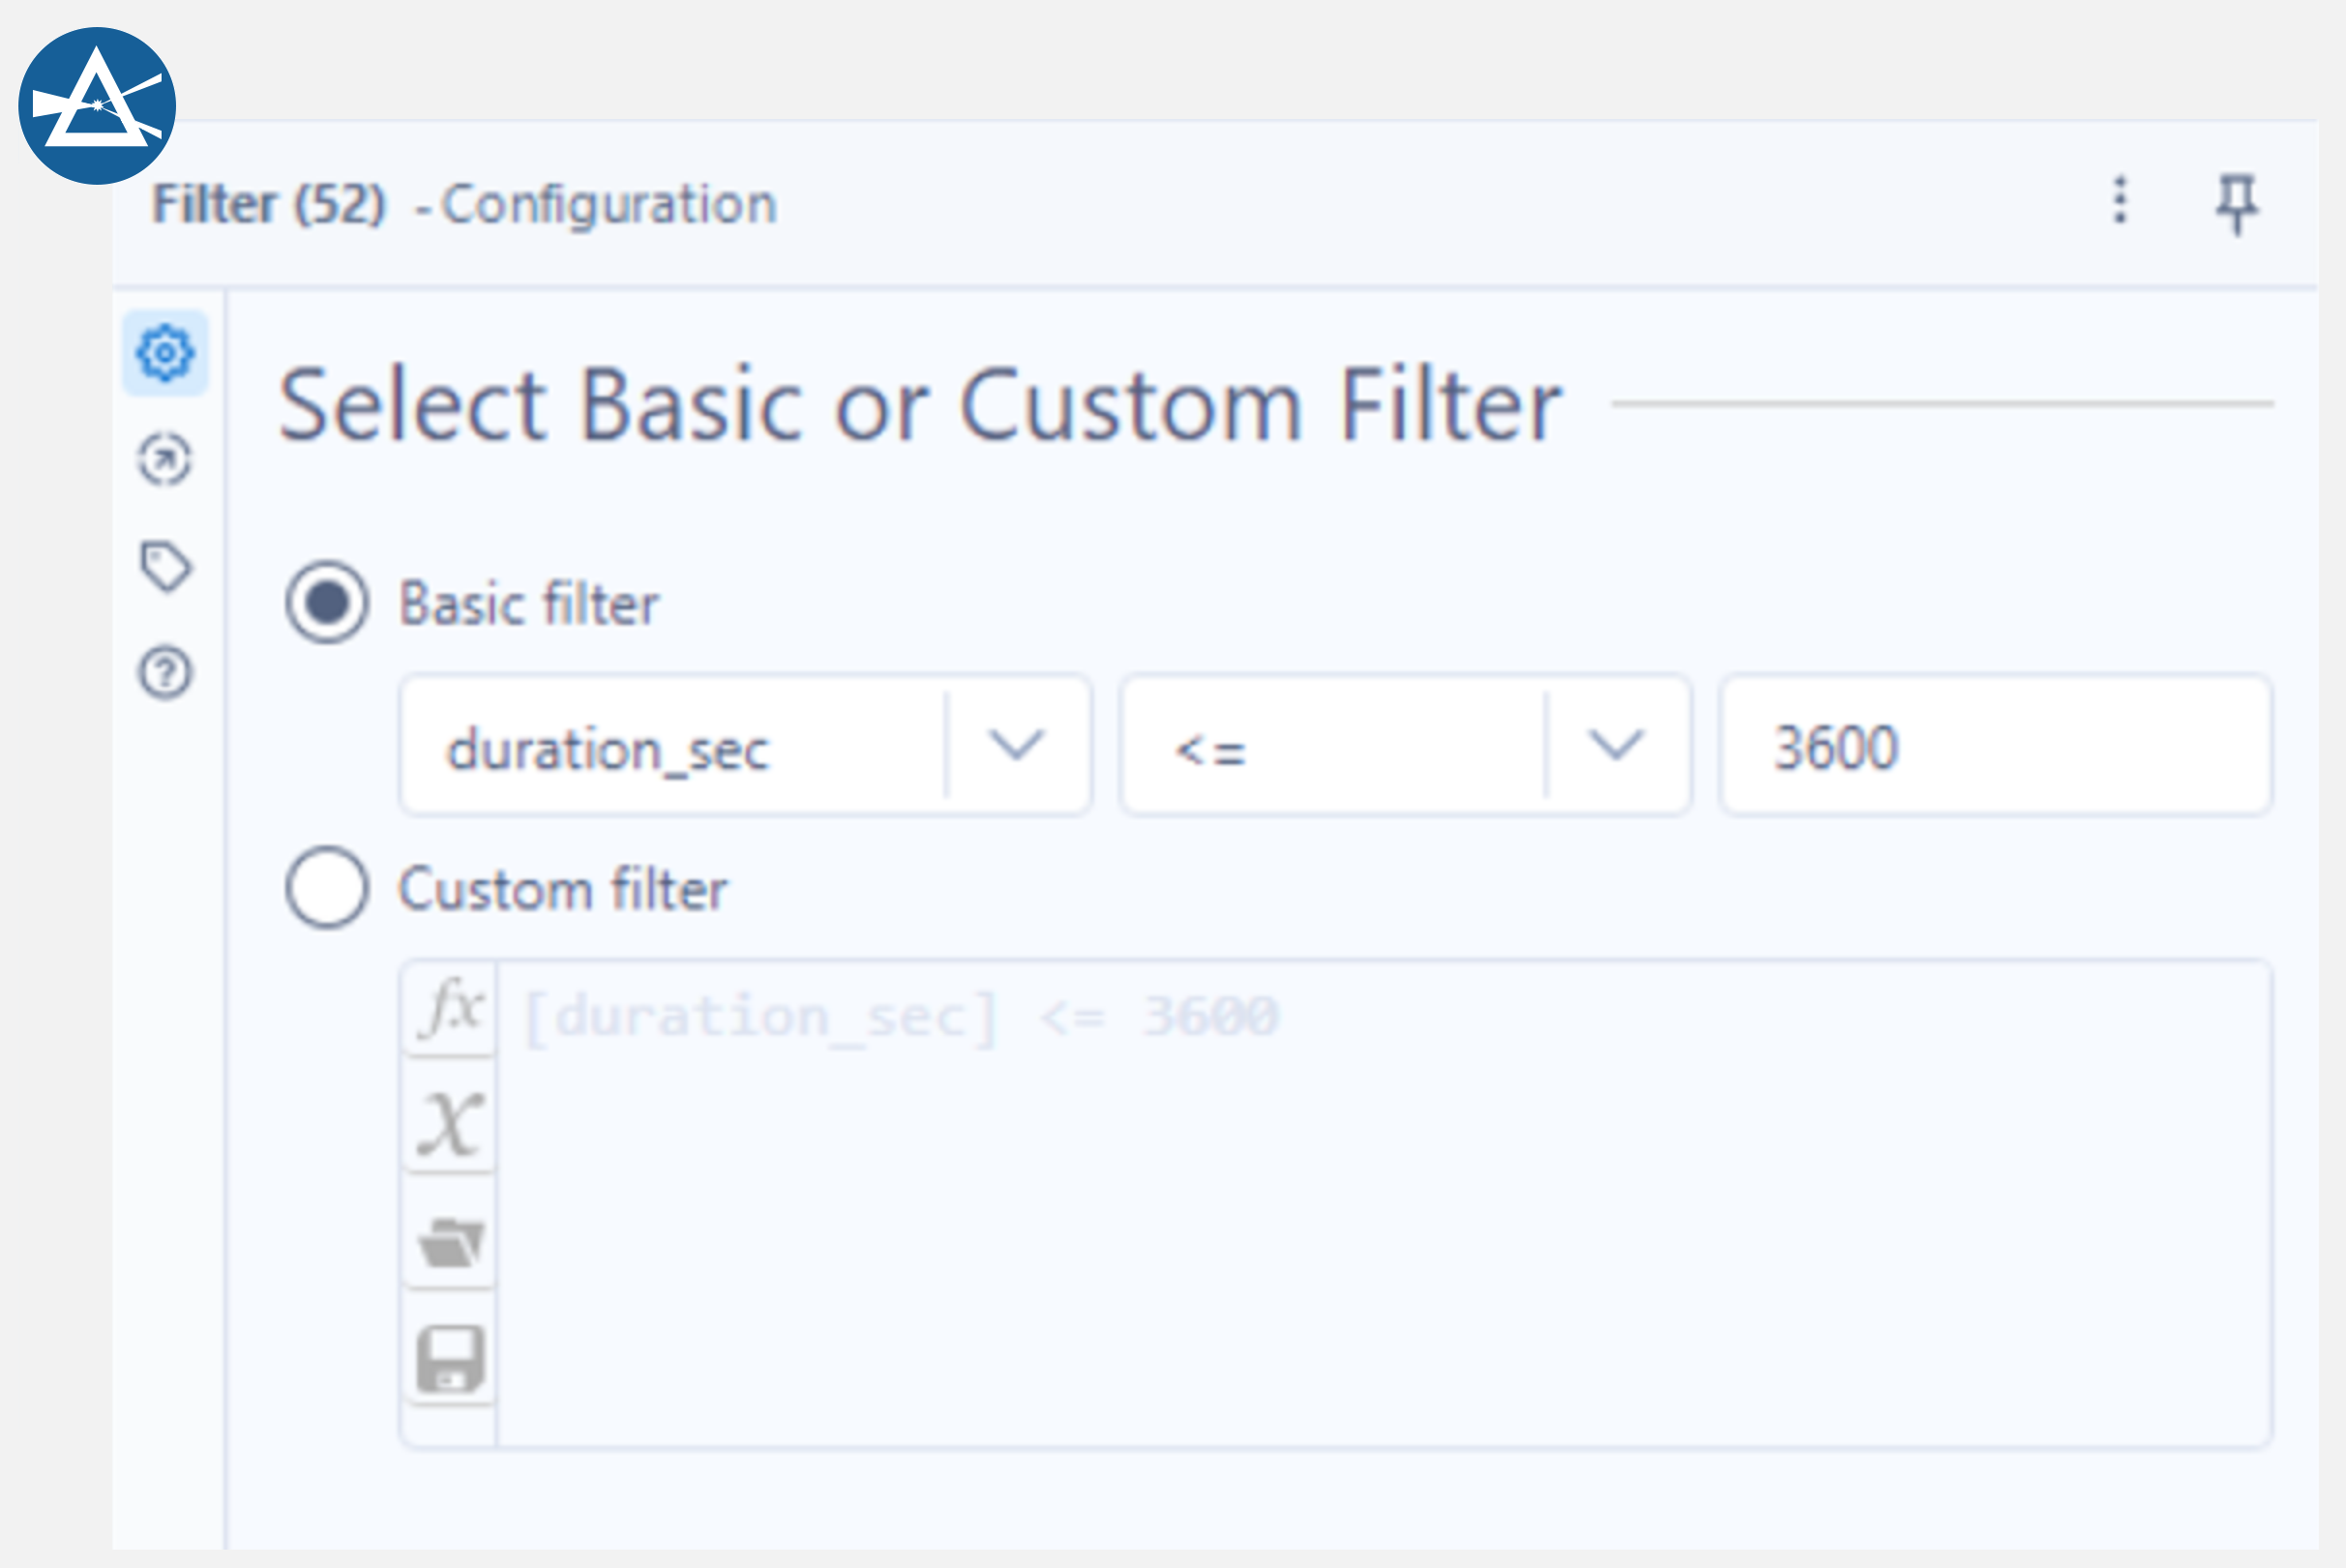 Filter tool configuration panel